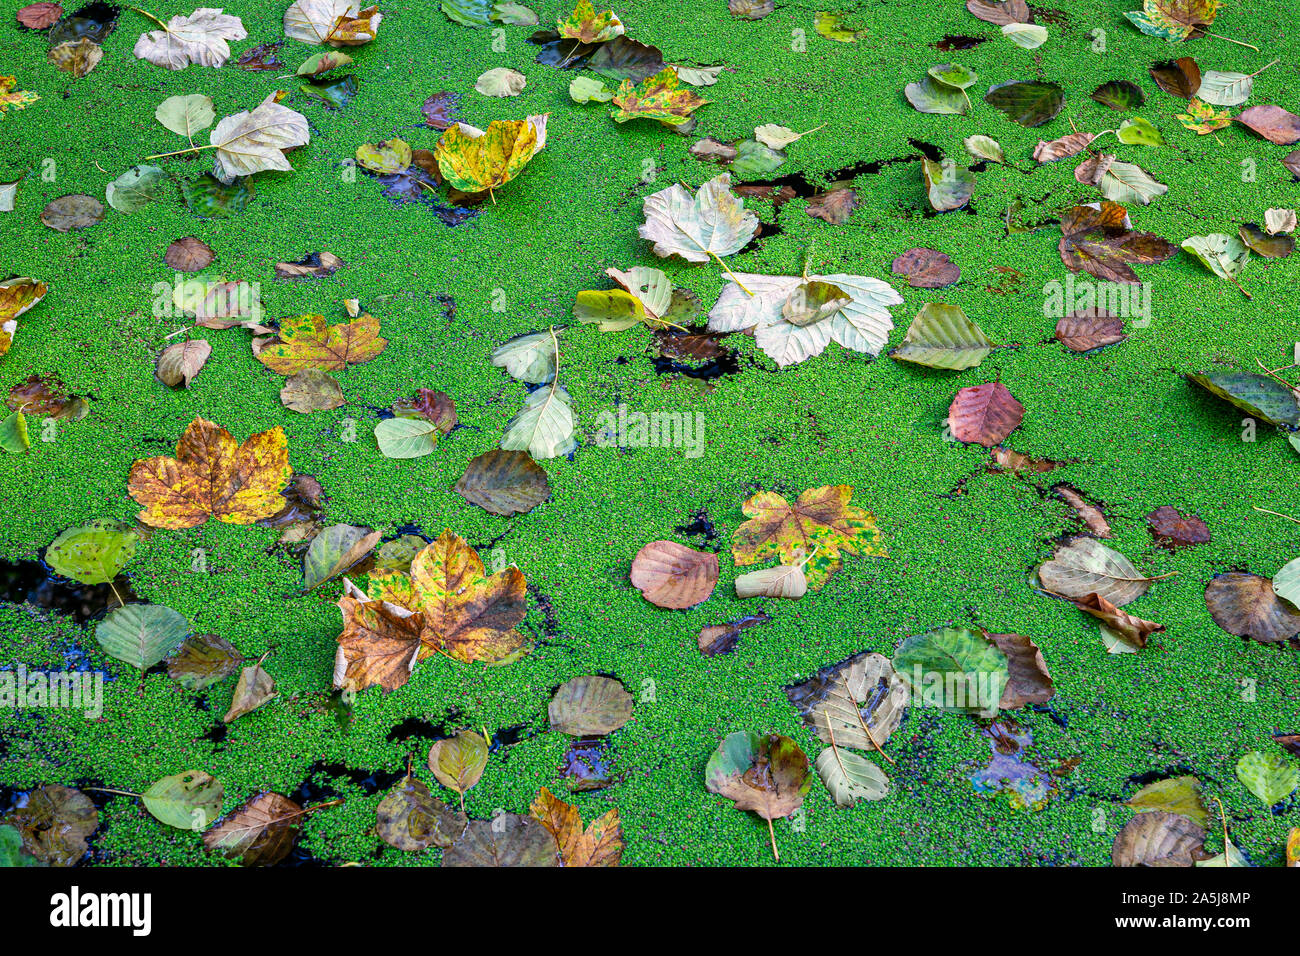 Colorful fallen autumn leaves on duckweed covered forest lake. Many orange, brown and yellow leaves in contrast to green duckweed. Ideal autumn backgr Stock Photo